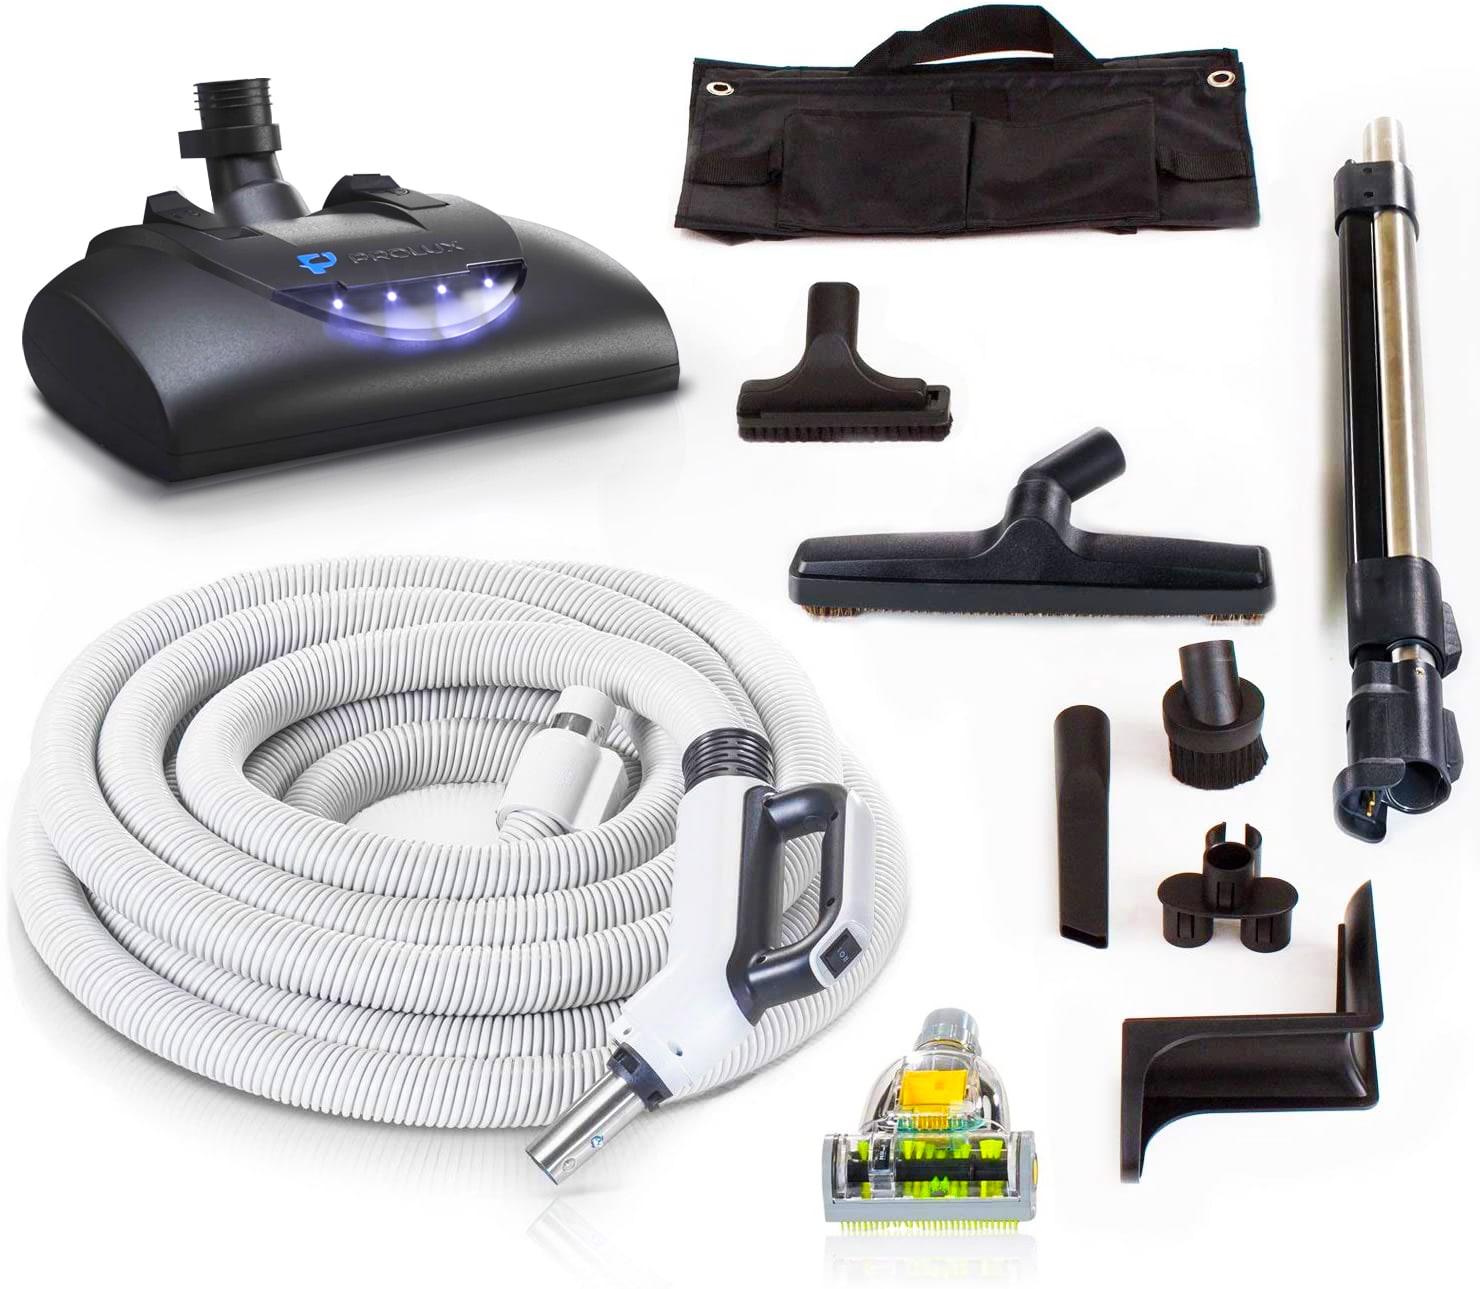 Premium 35 ft Universal Central Vacuum Hose Kit with Vessel Perk Power Nozzle - Includes Upholstery Brush, Pet Brush, and More in Black | - Prolux PL35